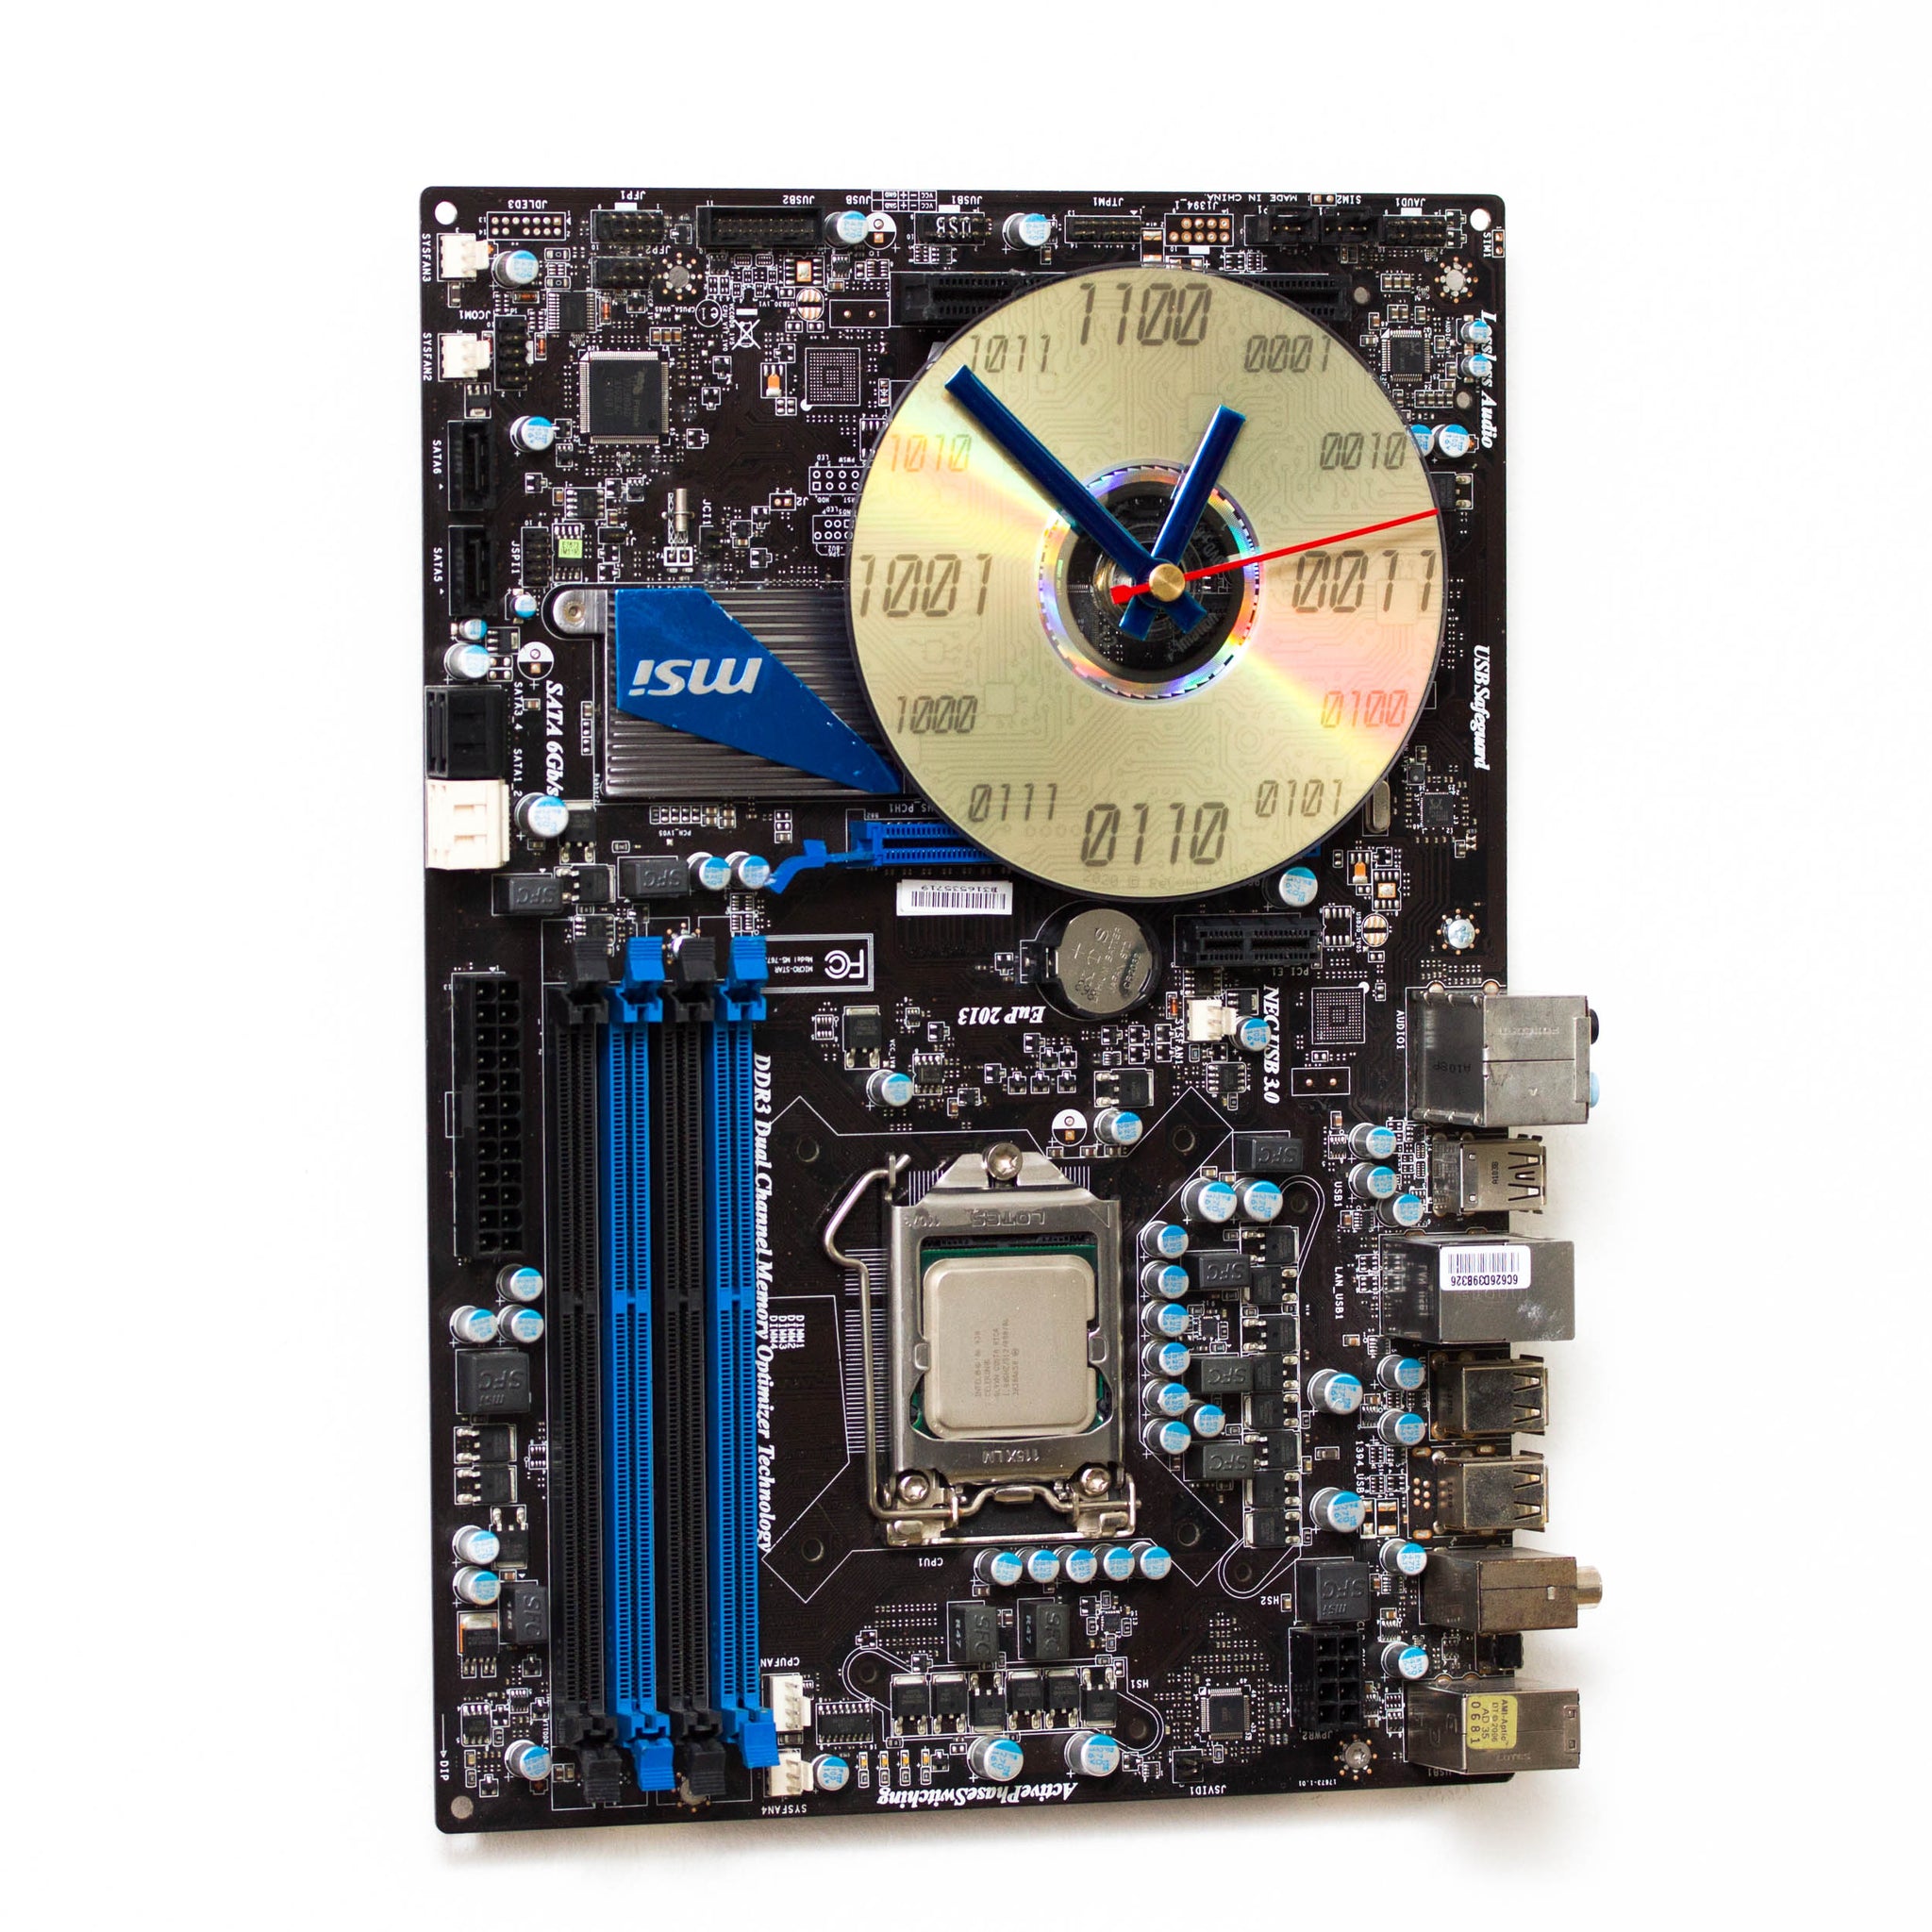 Wall clock made of dark brown circuit board with bright blue details